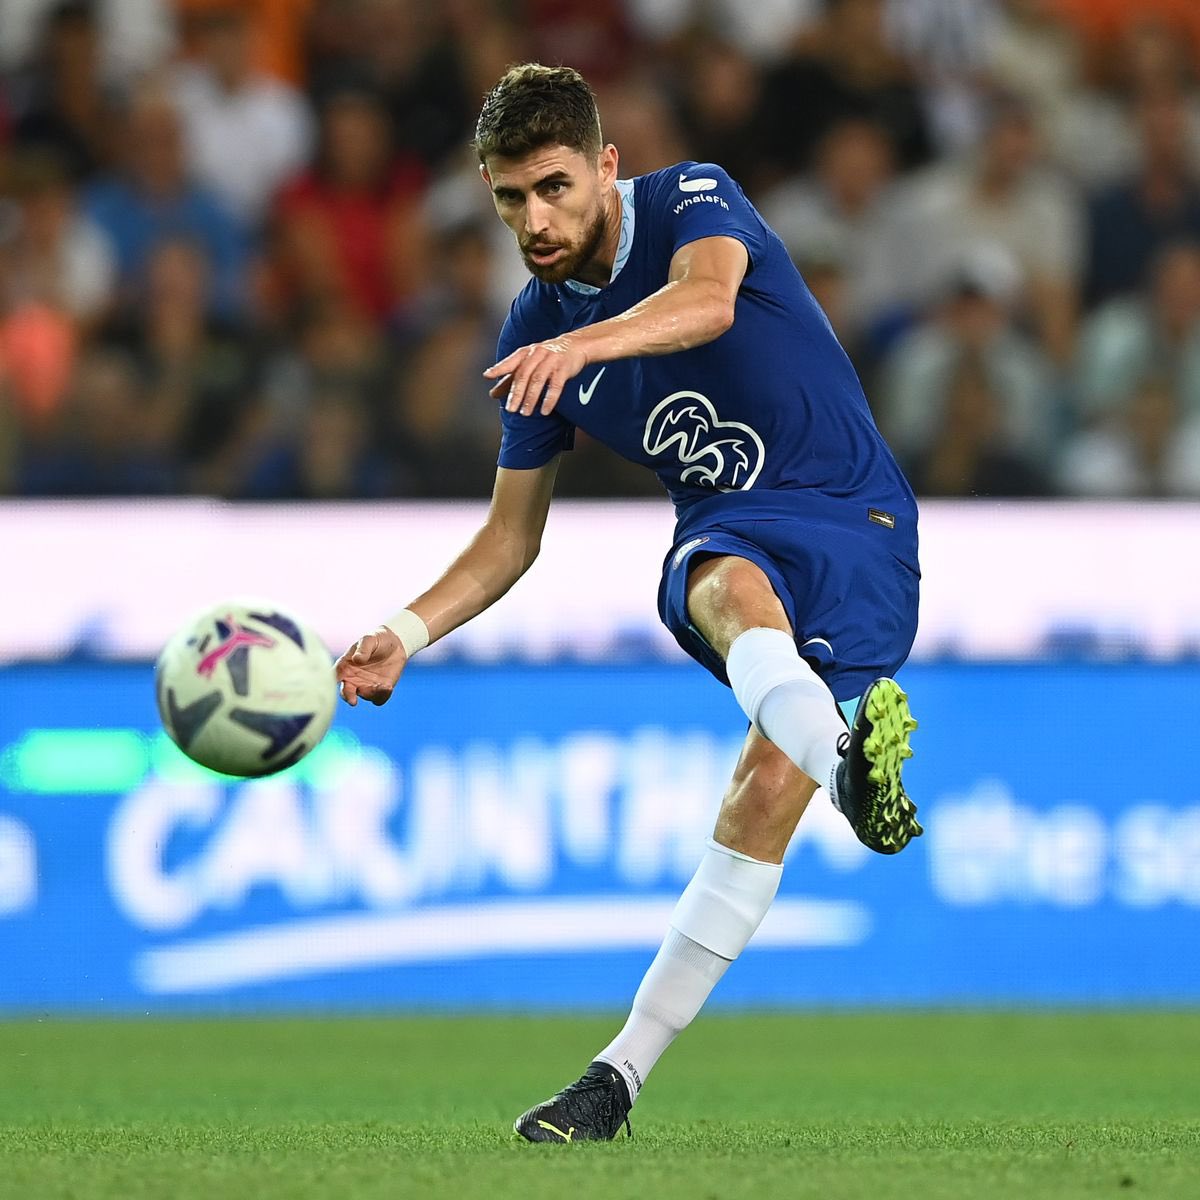 🇮🇹 Jorginho against Dinamo Zagreb: 🔘90 Touches 🔘76 Passes 🔘2 Chances Created 🔘93% Pass Accuracy 🔘2/2 Take-ons 🔘1/1 Aerial Duels 🔘4/5 Ground Duel 🔘1 Foul Suffered 🔘2 Interceptions 🔘1 Tackle Boss. #CFC #Chelsea #UCL #CHEDIN